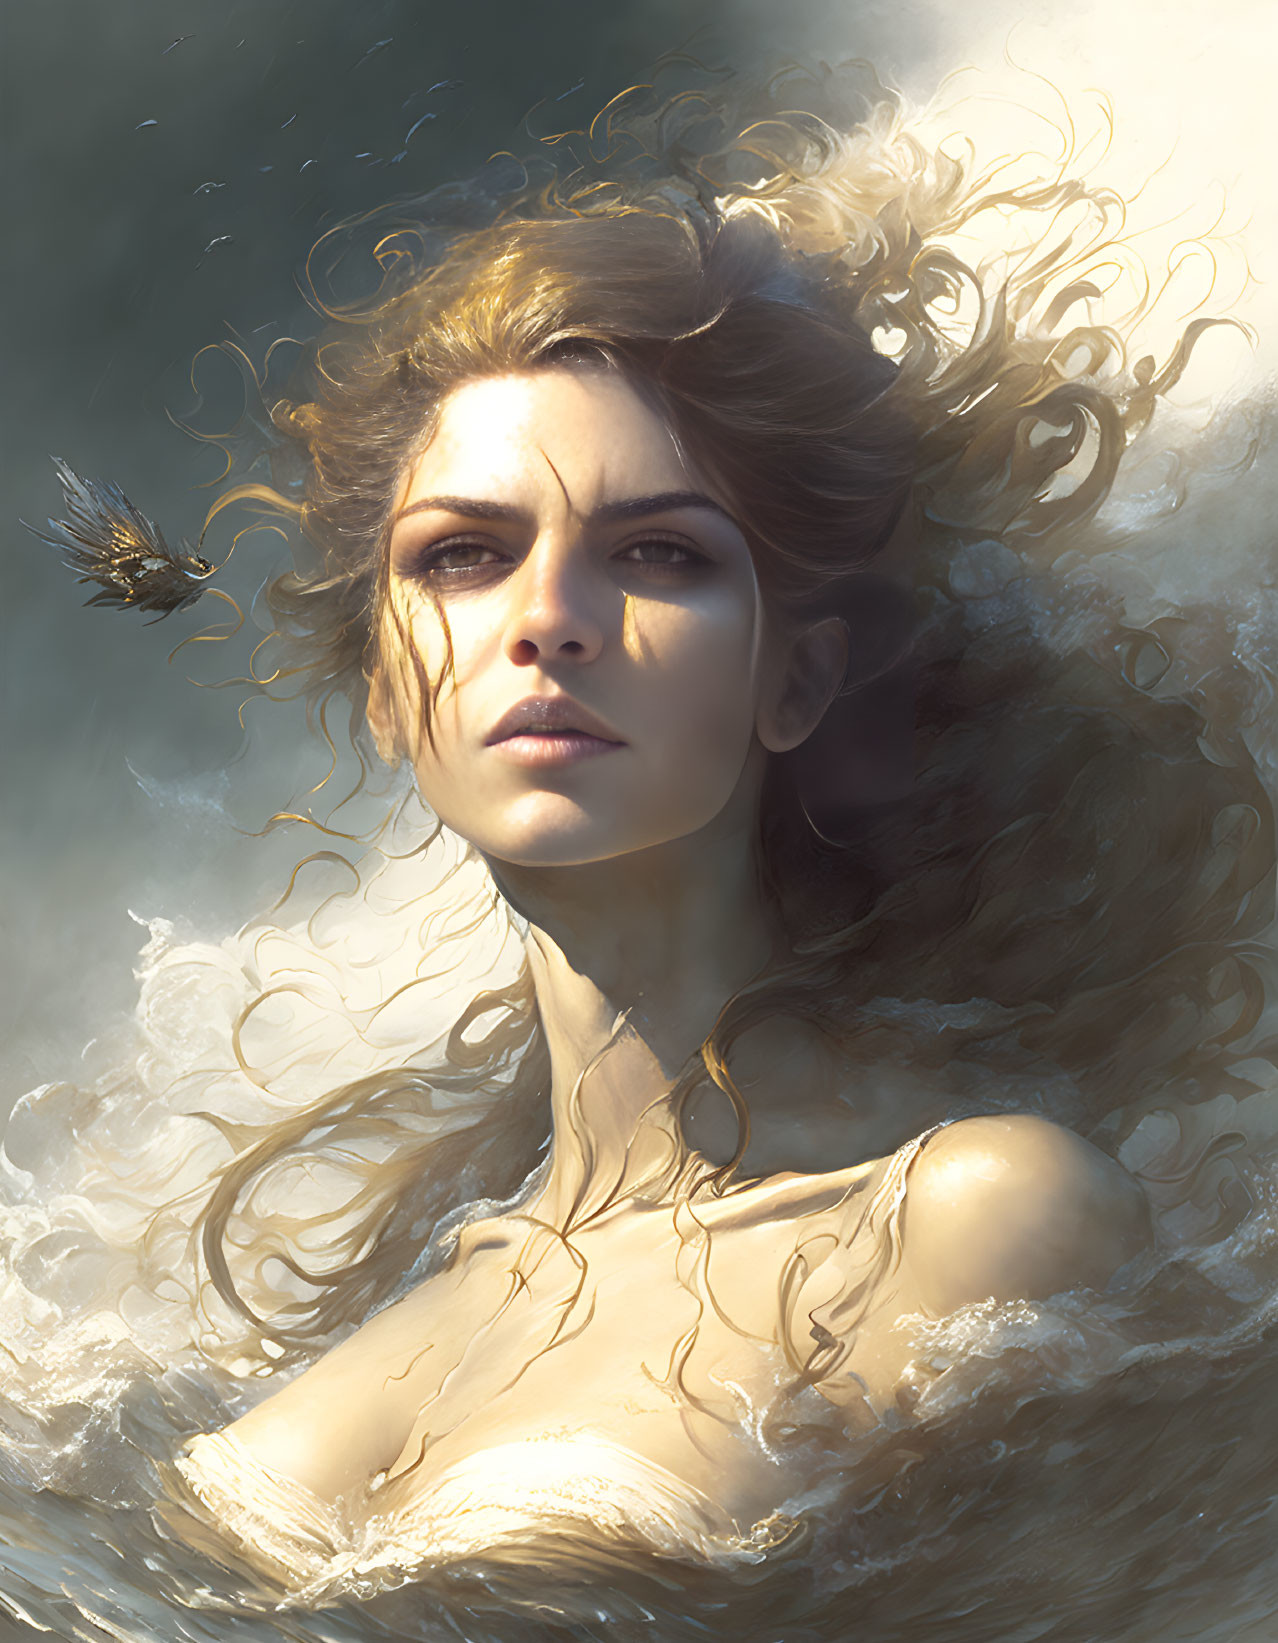 Digital painting of woman underwater with flowing hair and bird in golden light